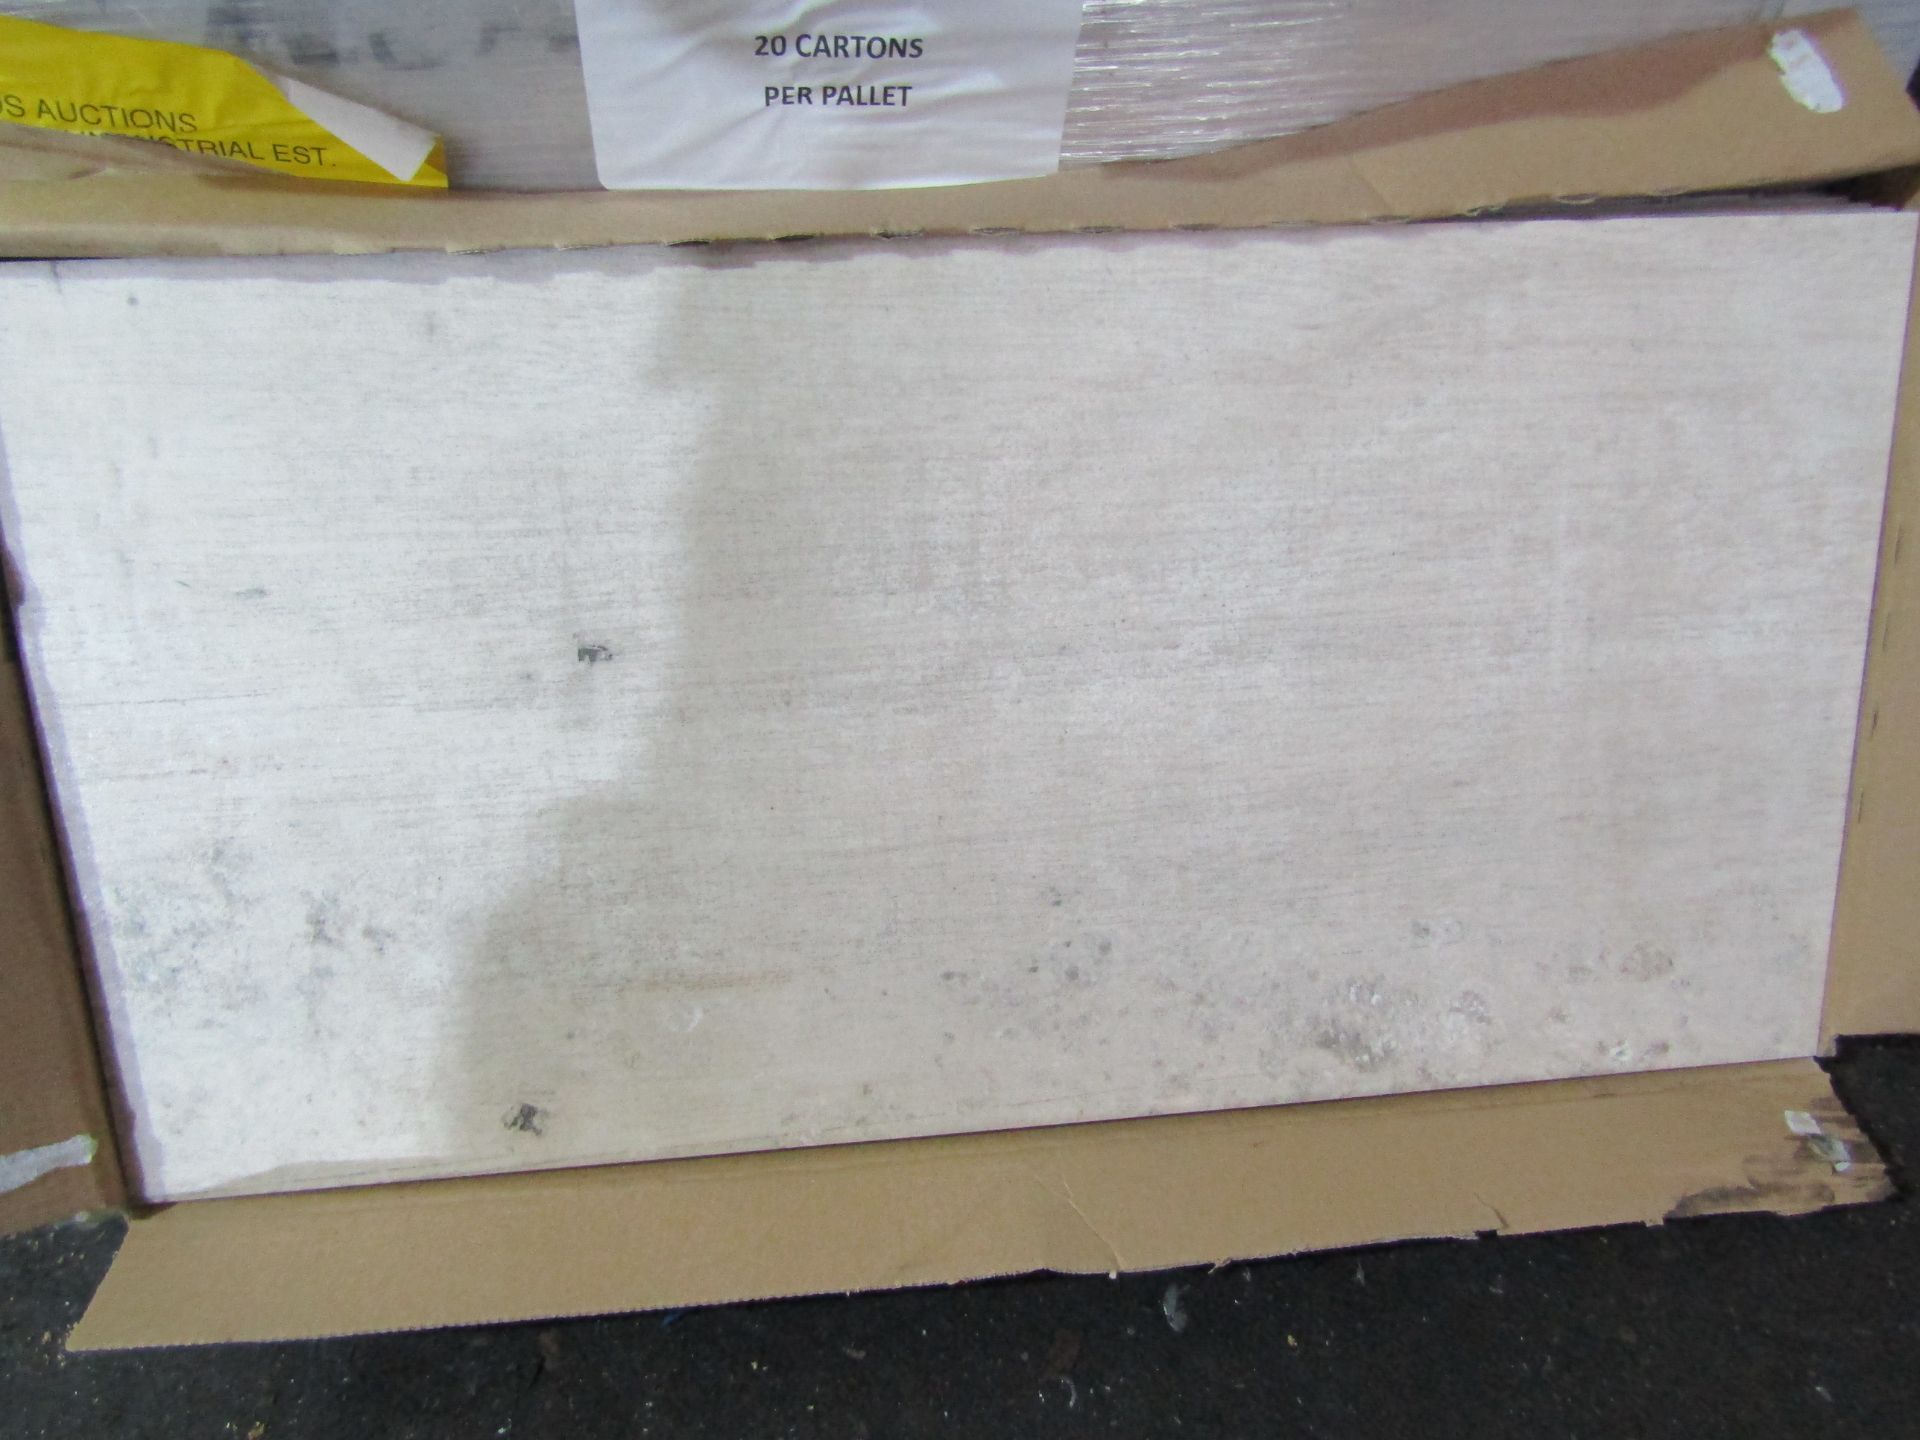 1X Pallet Containing 20x Packs of 5 Wickes 600x300mm Cabin Tawny Beige Floor and Wall Tiles - - Image 2 of 3